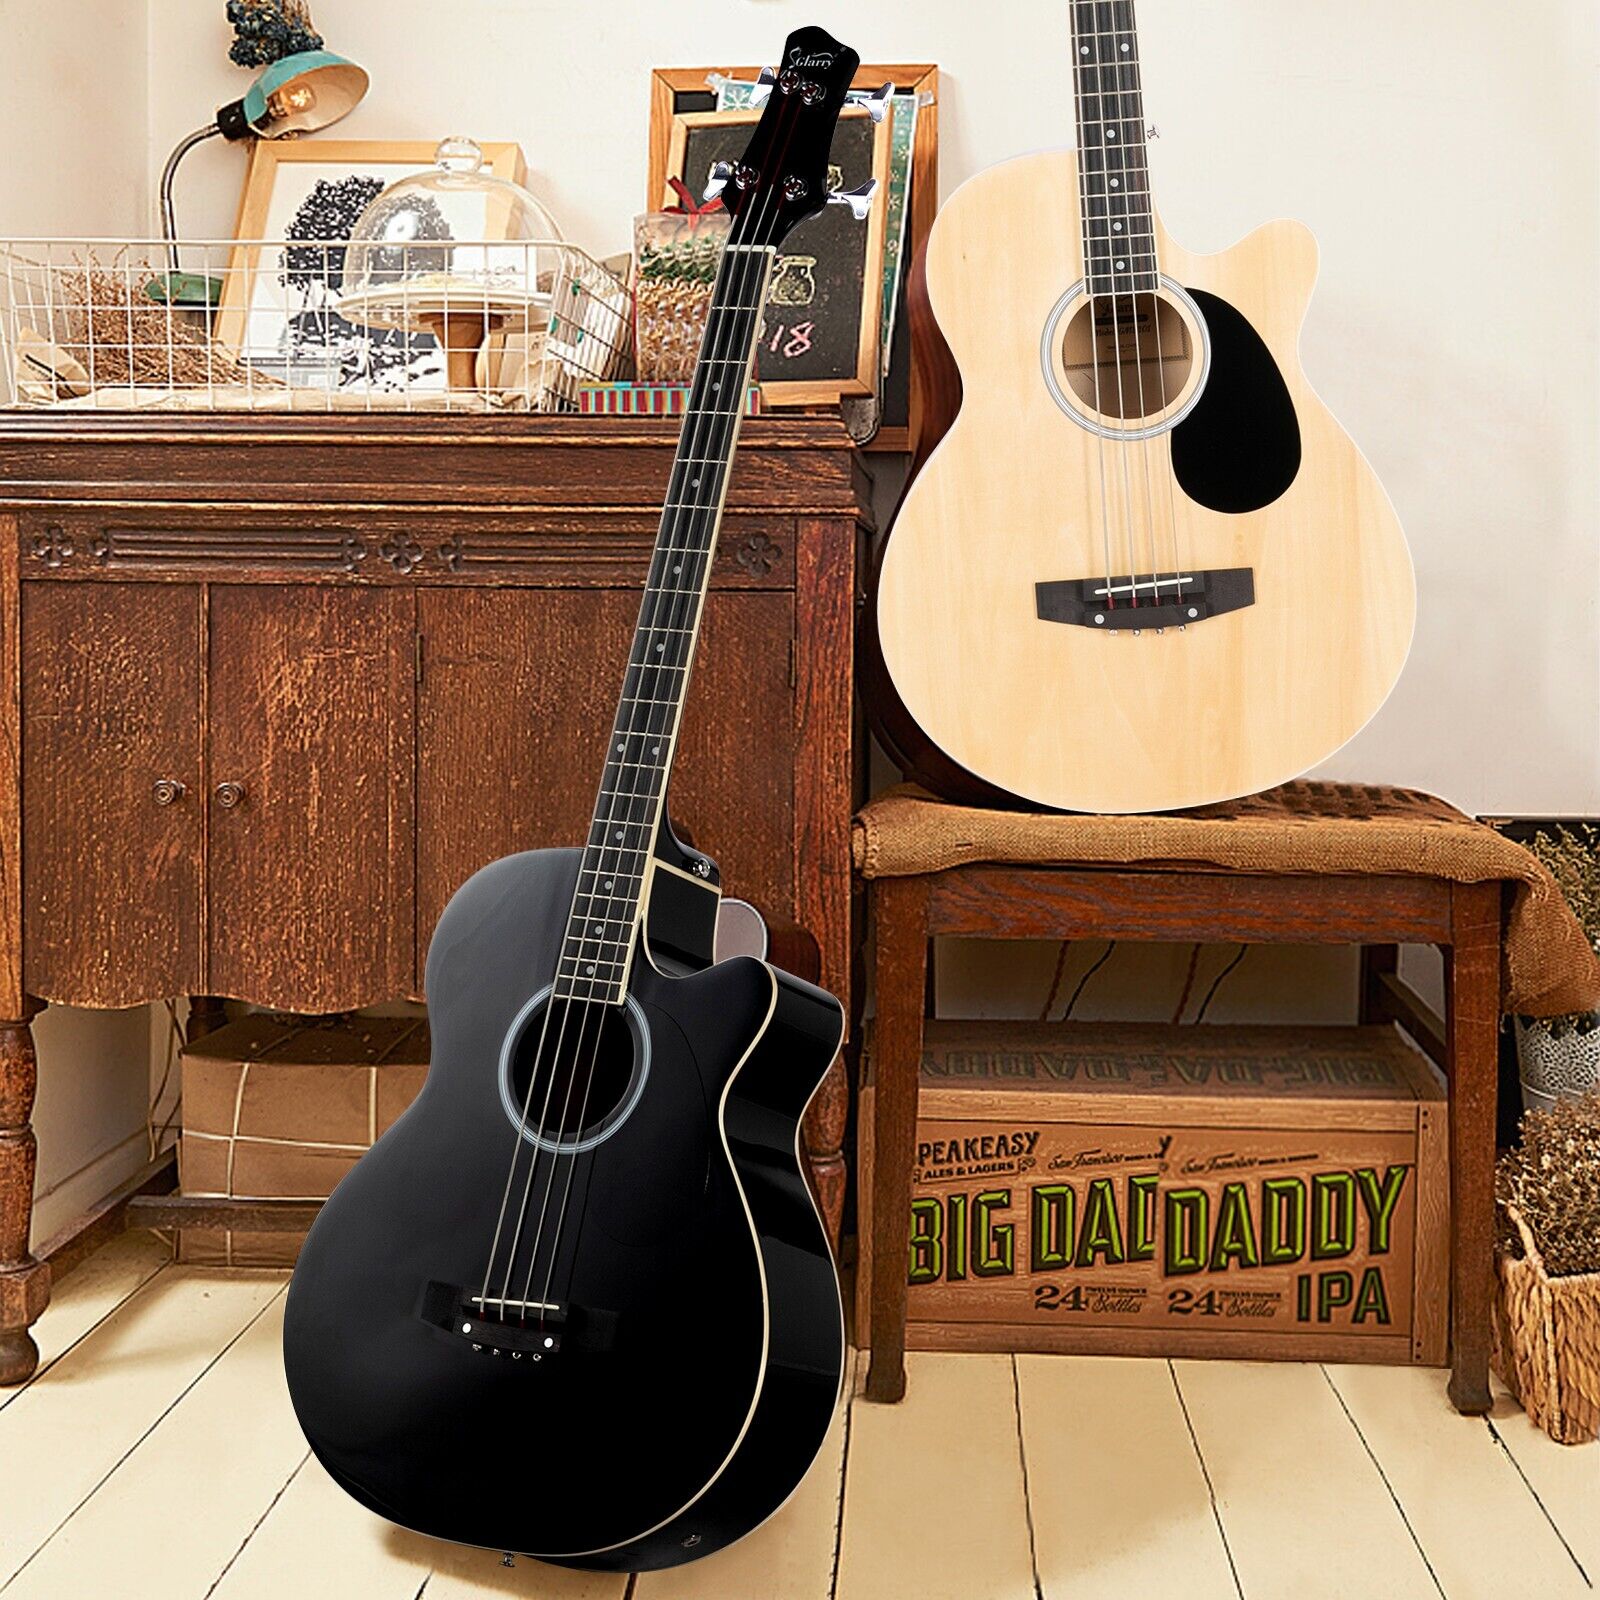 Glarry GMB101 Black 4 string Electric Acoustic Bass Guitar w/ 4-Band Equalizer 18